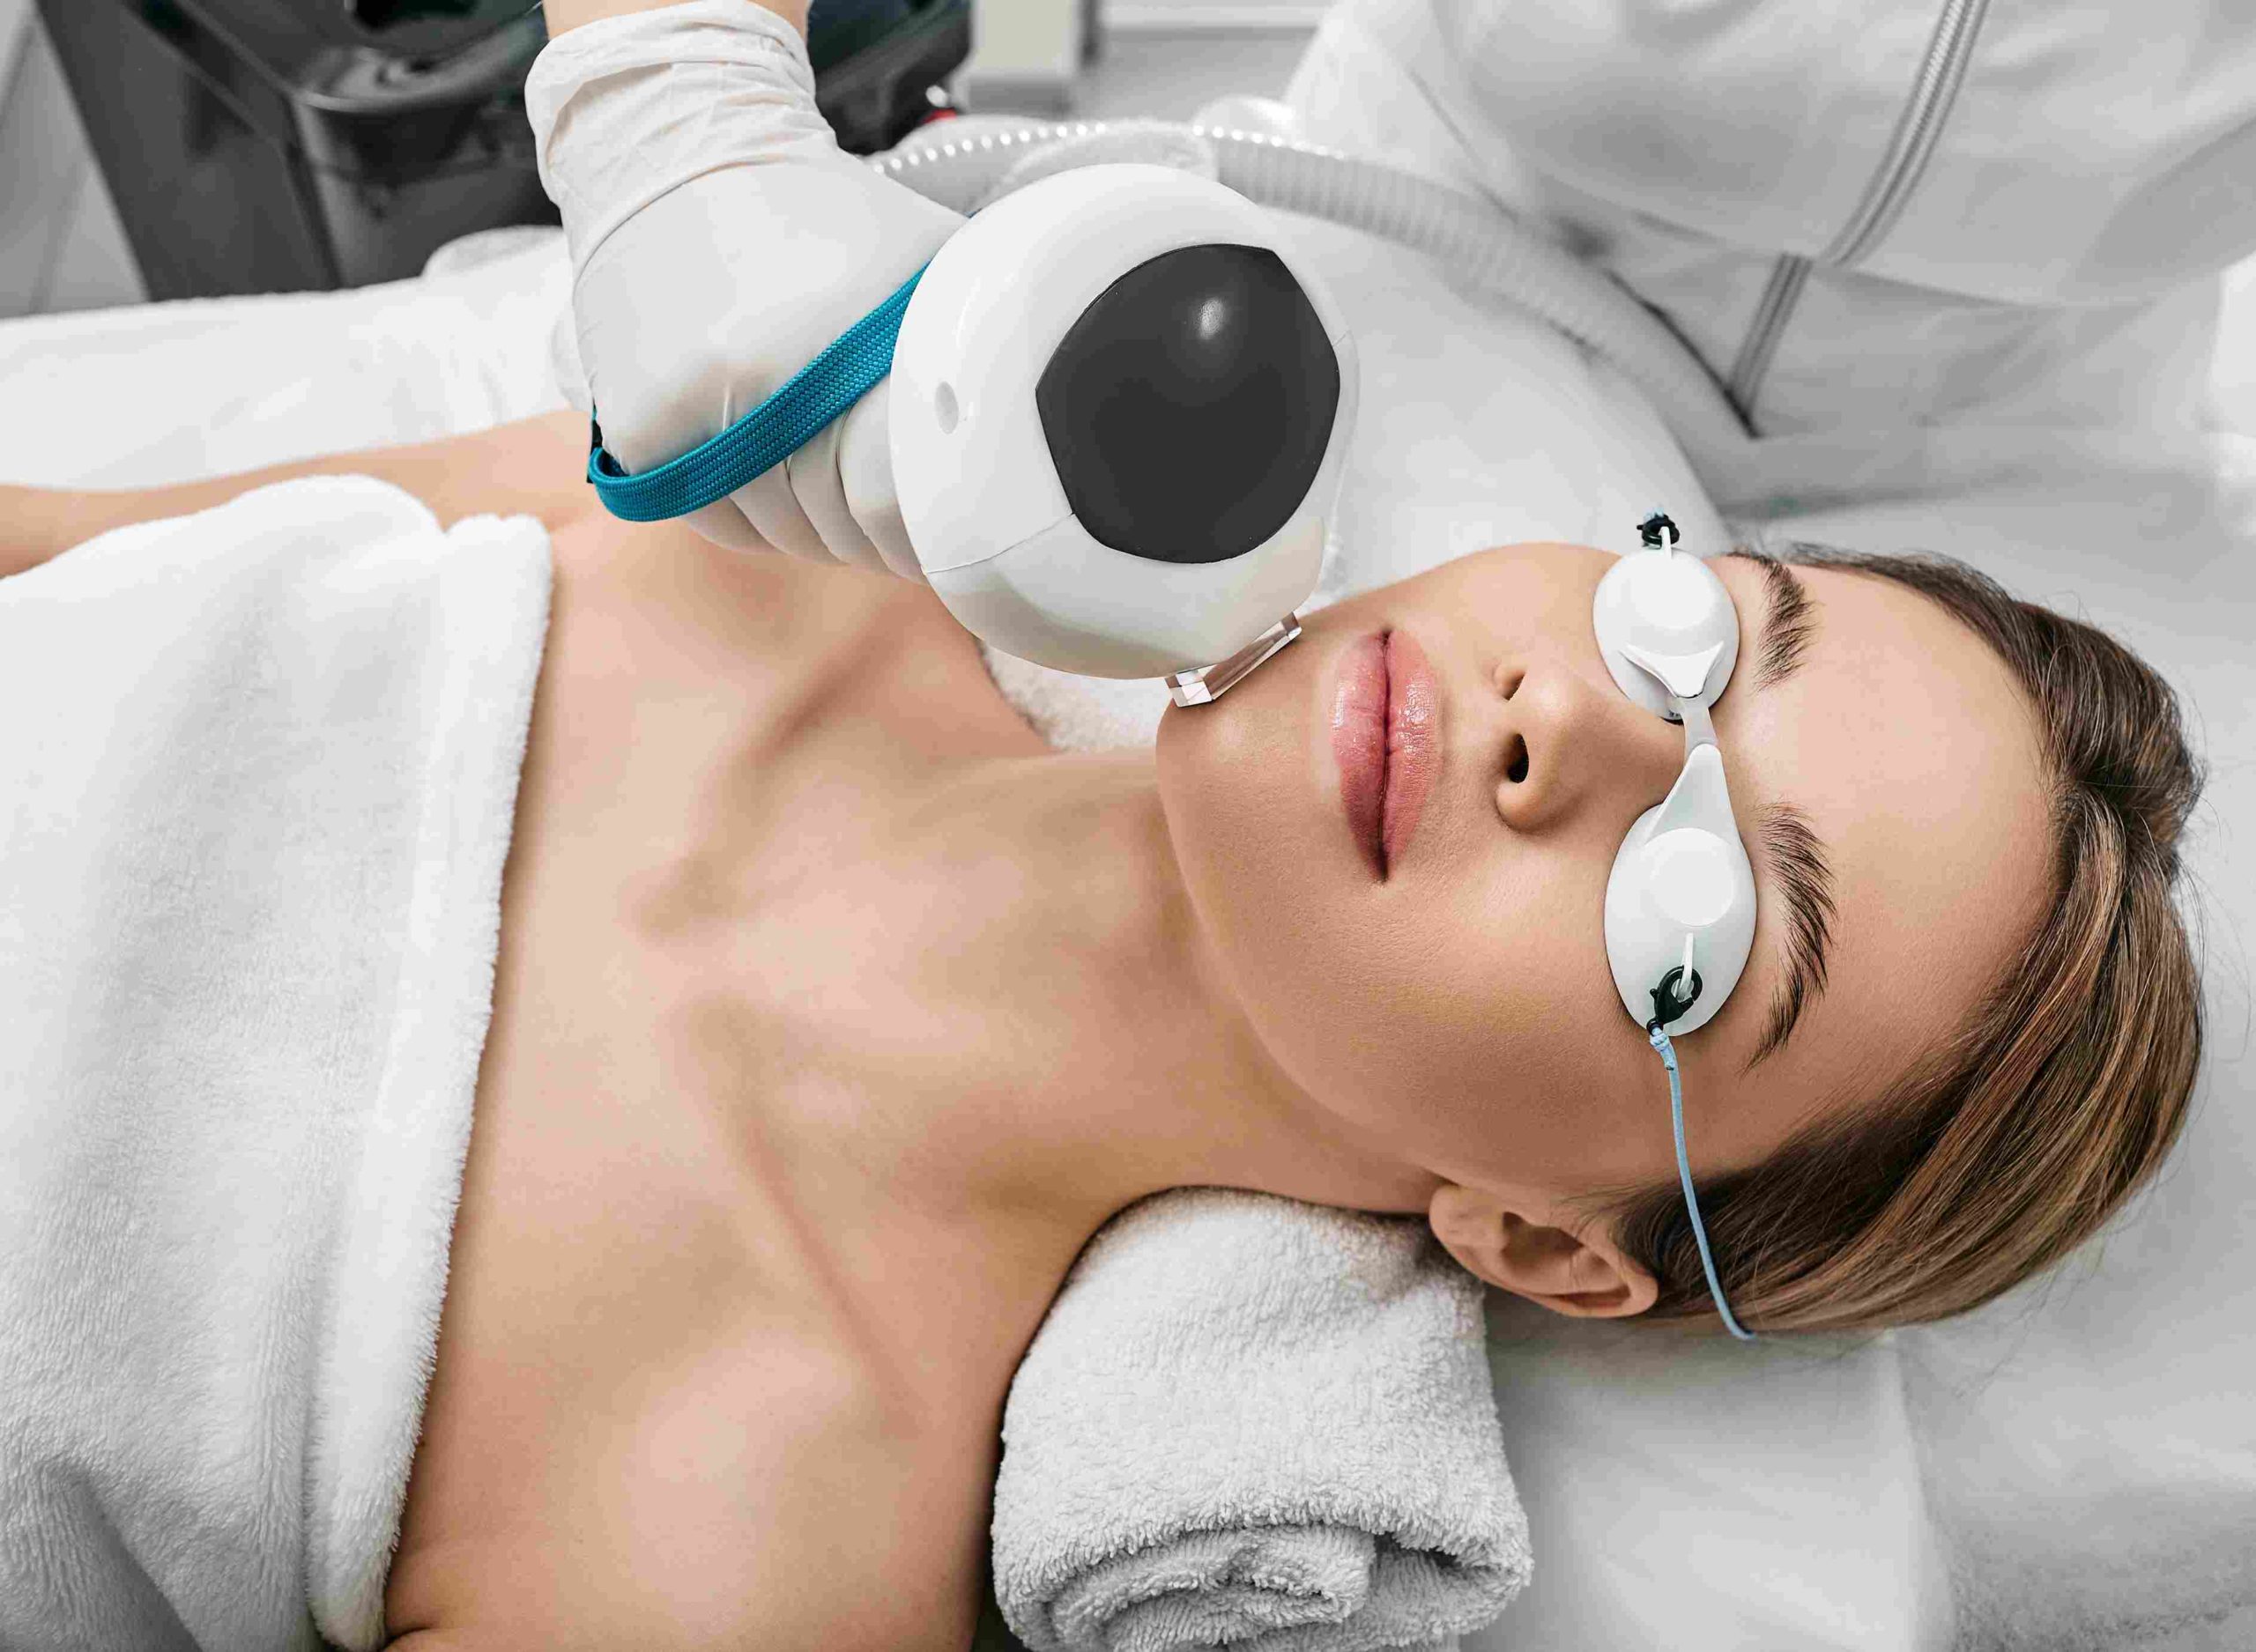 Young Girl Getting ThreeForMe Laser Treatment by Wearing Safety Goggles | Avail Aesthetics in Raleigh, NC